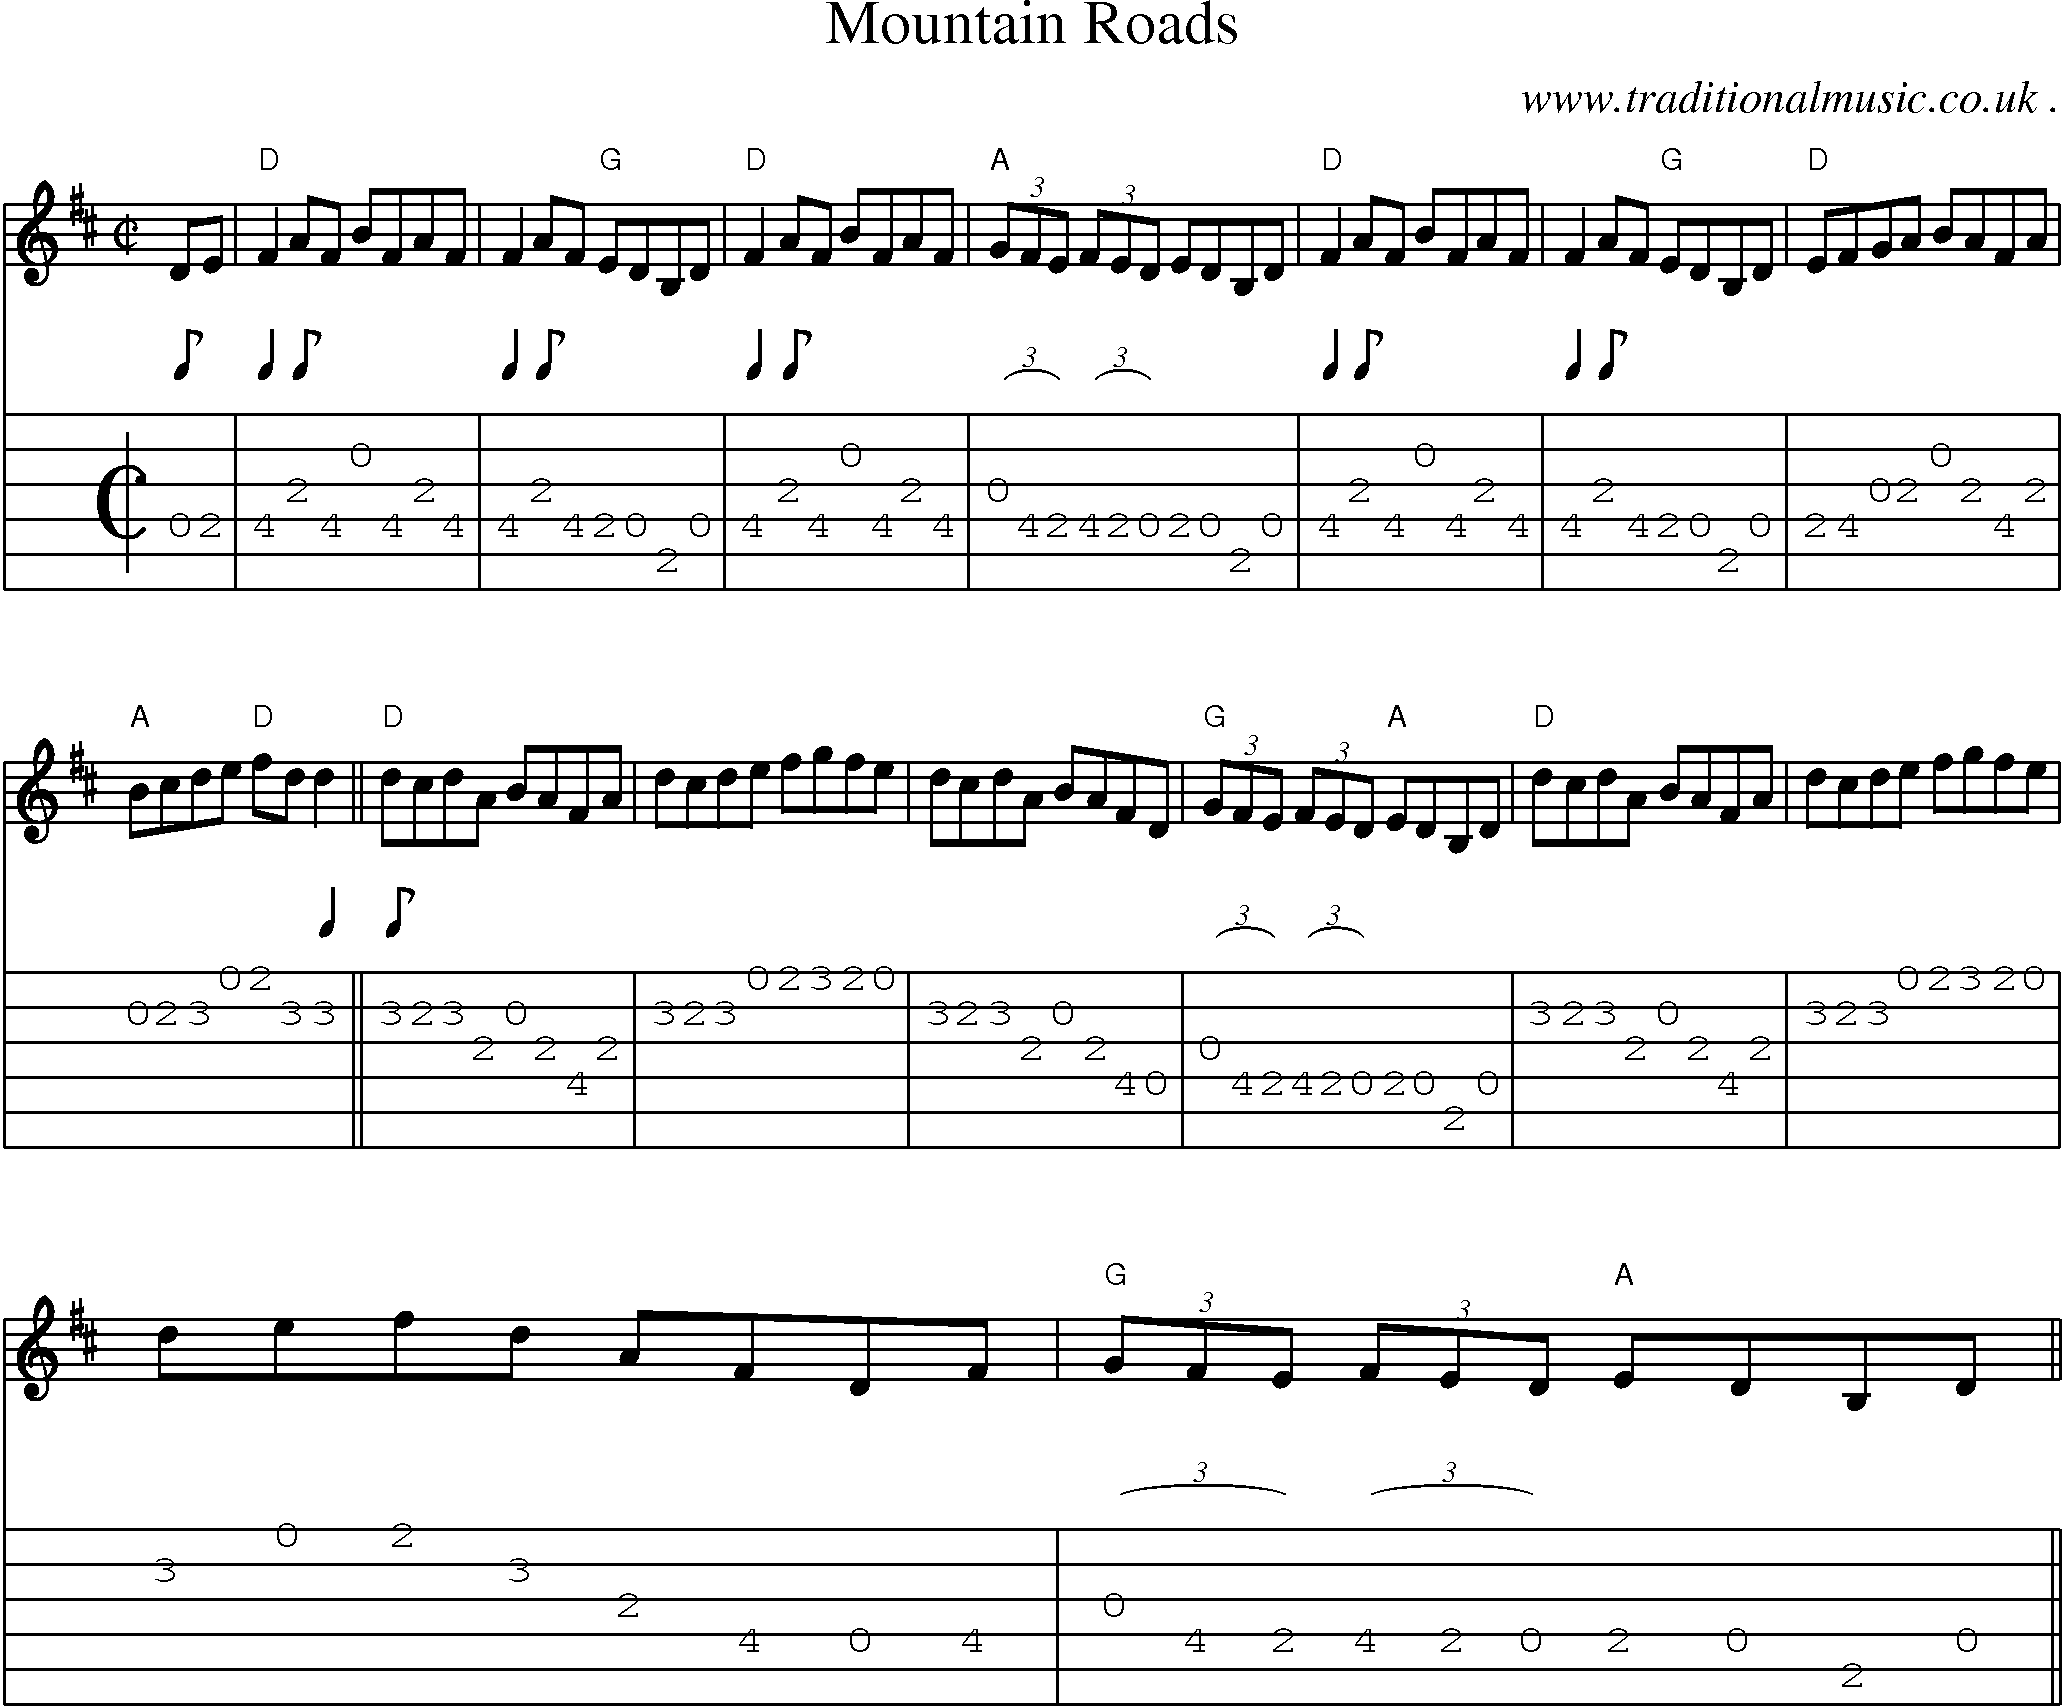 Music Score and Guitar Tabs for Mountain Roads